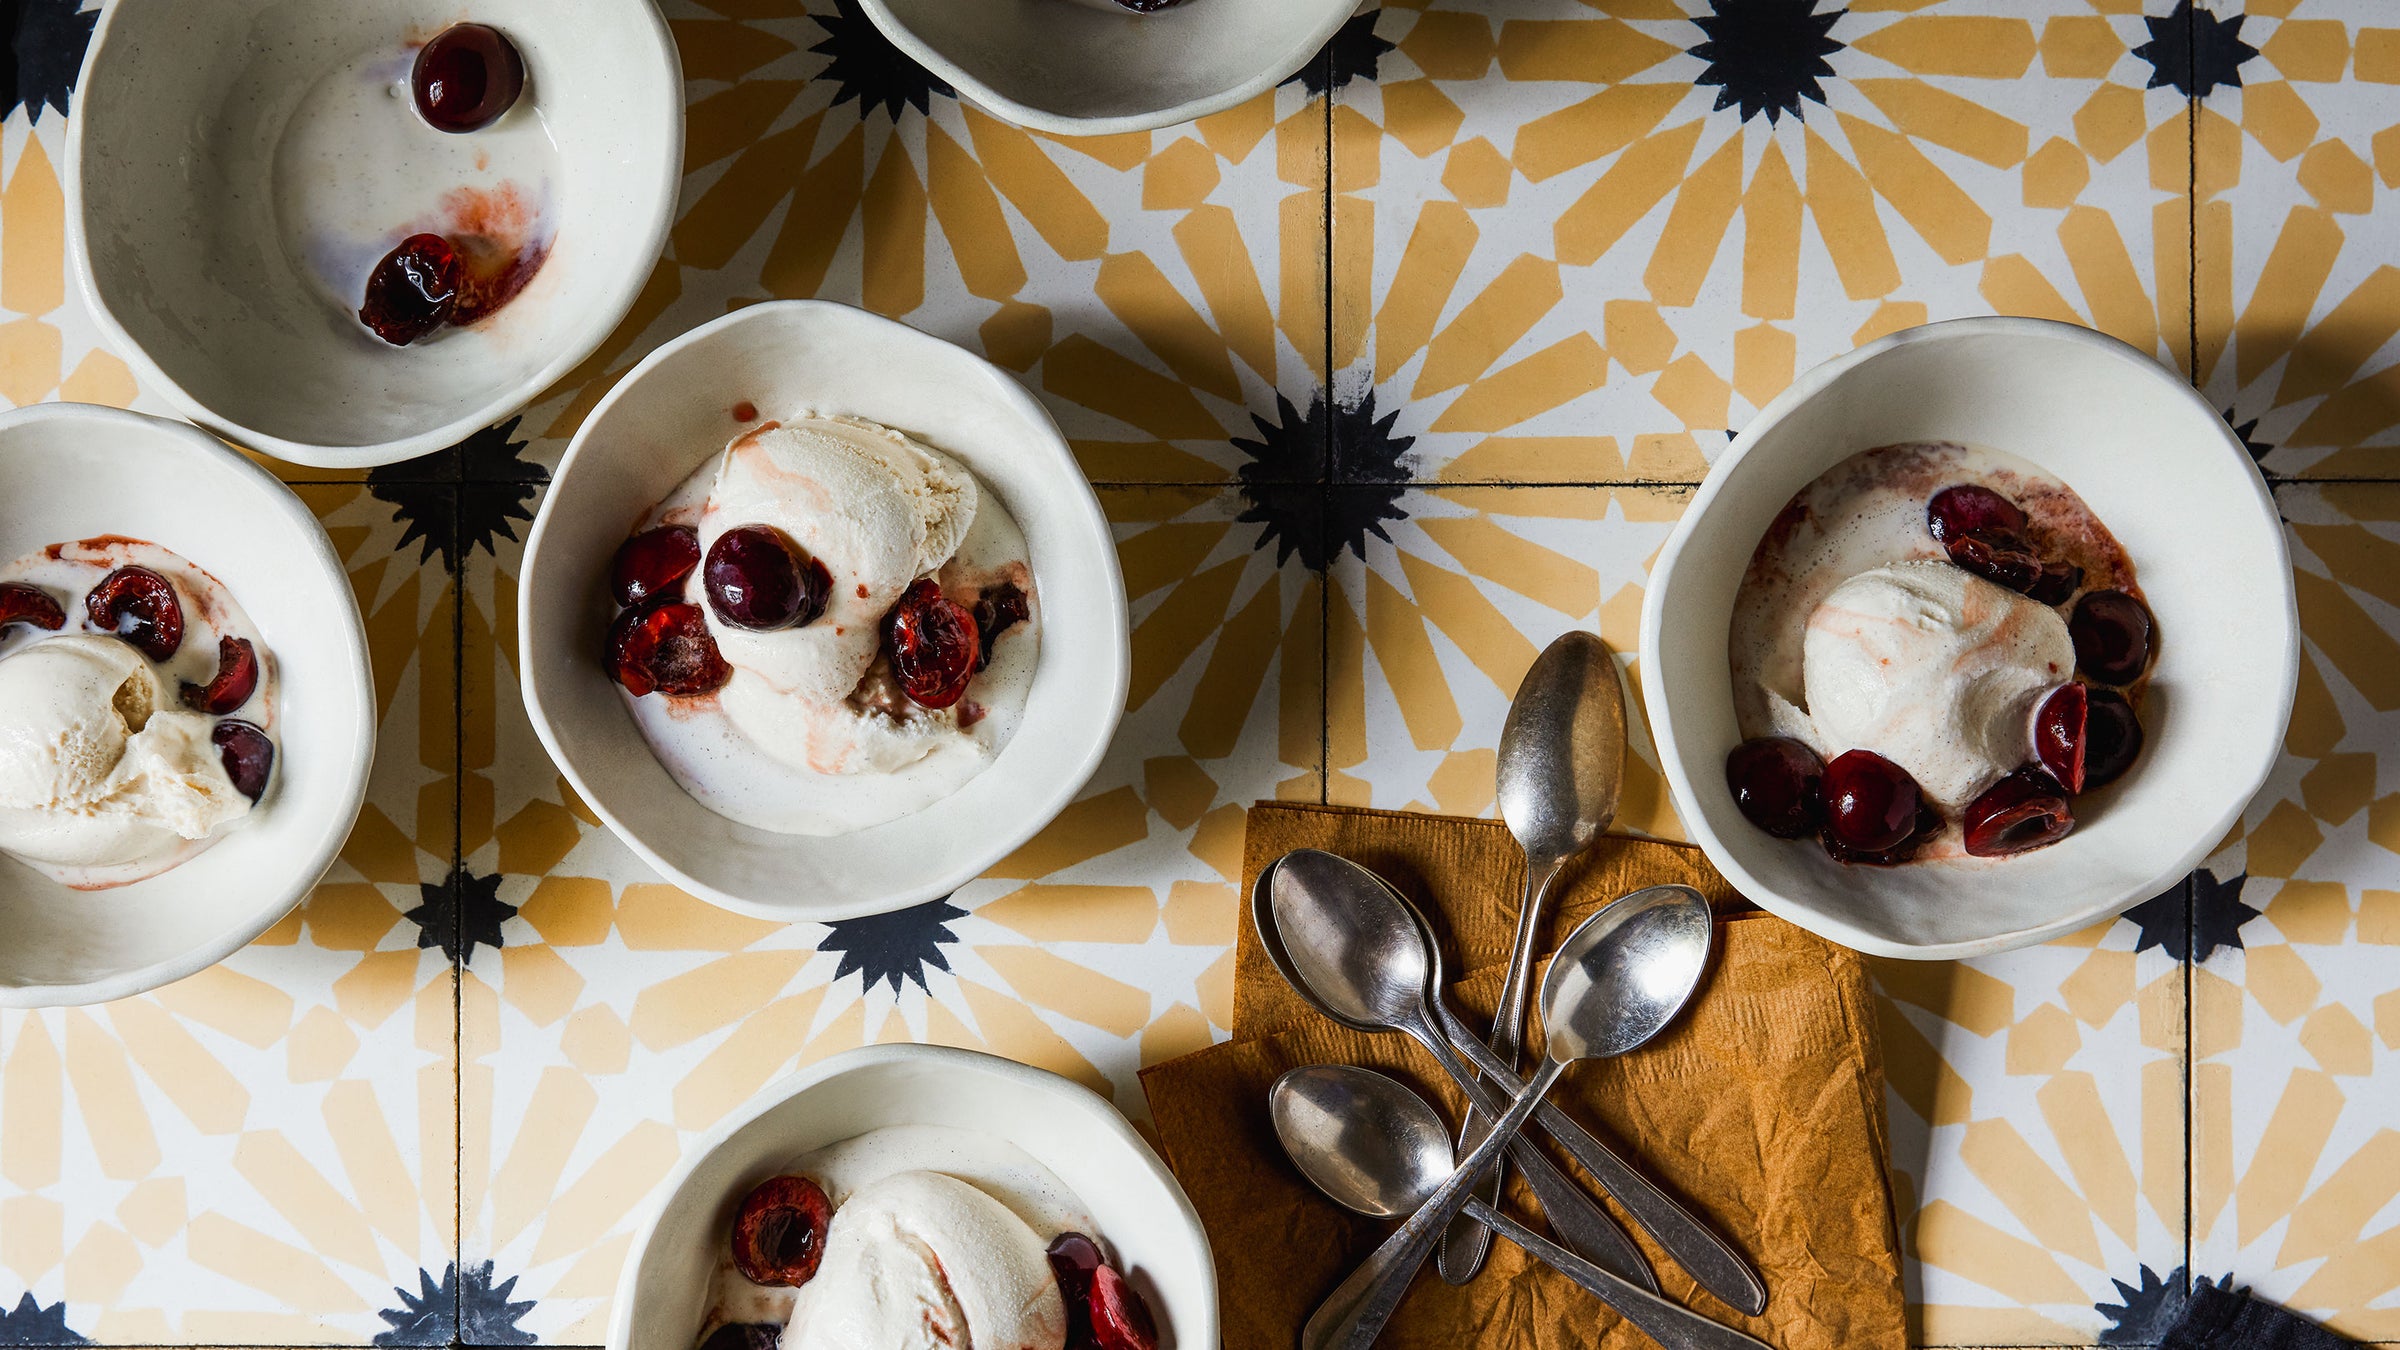 DBO HOME handmade white ceramic bowls with vanilla ice cream and ruby red cherries on yellow and blue flower tiles and a pile of spoons